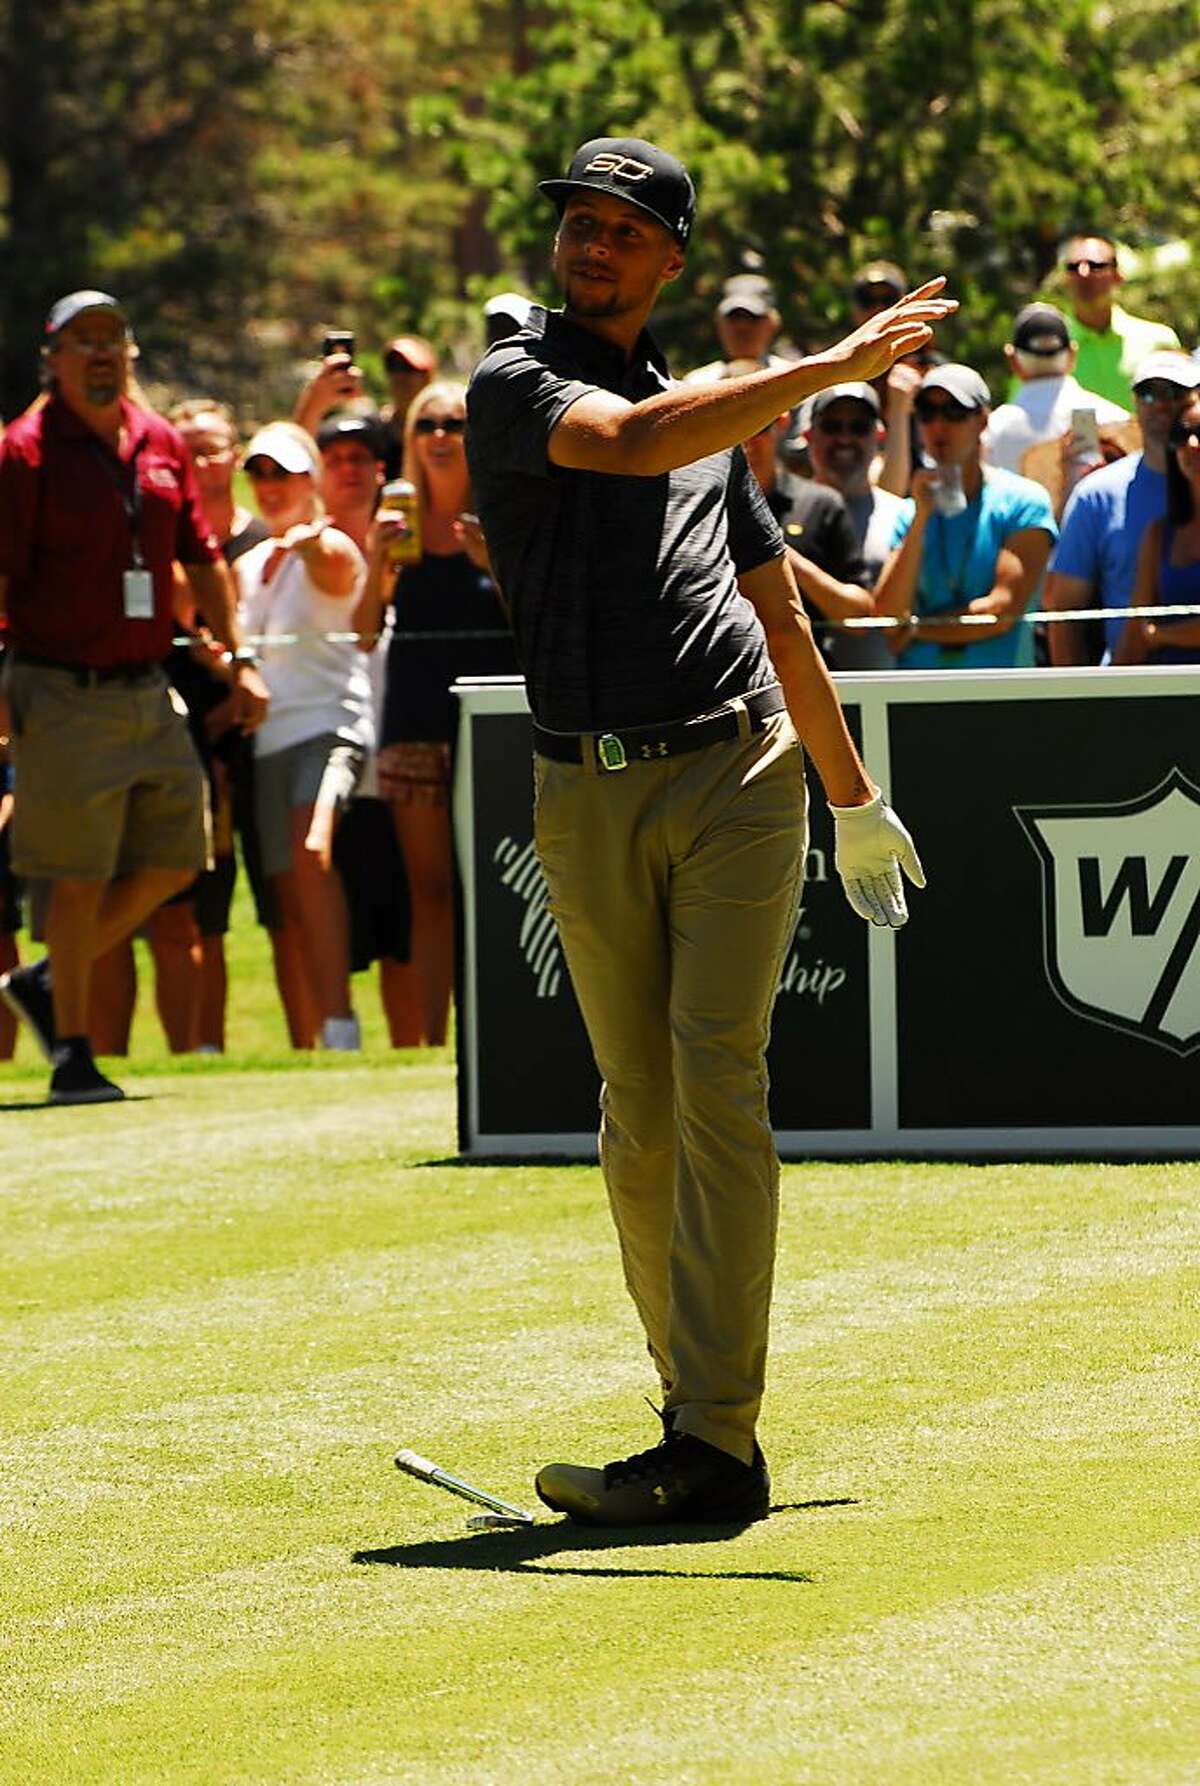 Stephen Curry, Justin Timberlake and Anthony Ribeiro played golf in front of �big crowds at the American Century Championship at Edgewood Tahoe Golf course in Stateline, Nev., on July 23. The trip played a lot of golf and found time to ham it up, too, especially on the tournament's raucous 17th hole, which runs alongside Lake Tahoe.